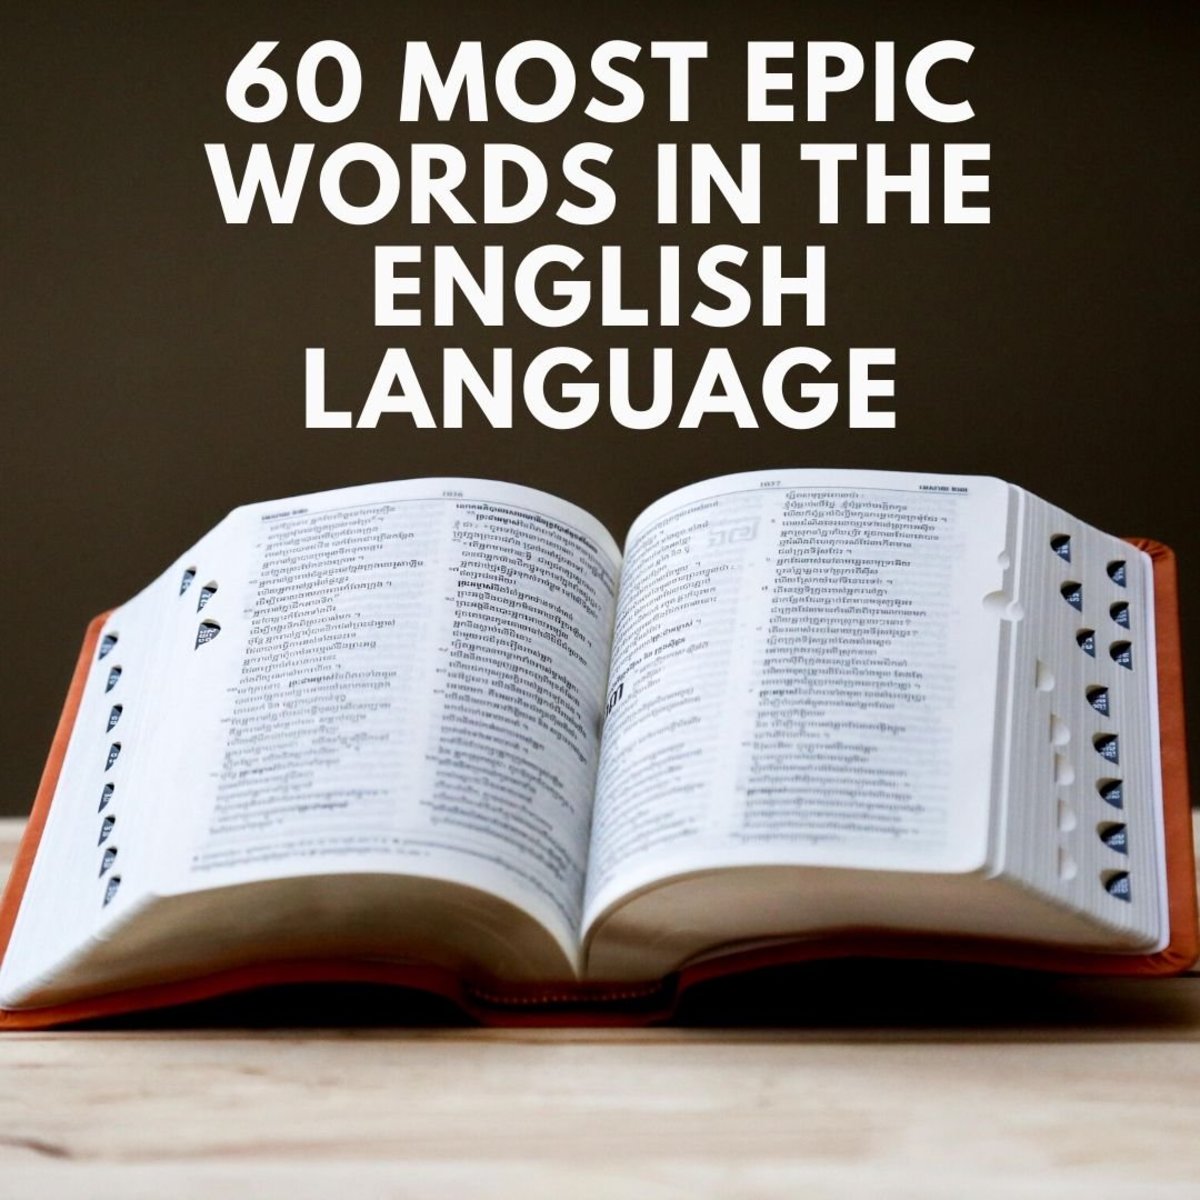 What are some of the coolest words in the English language? Read on to find out!